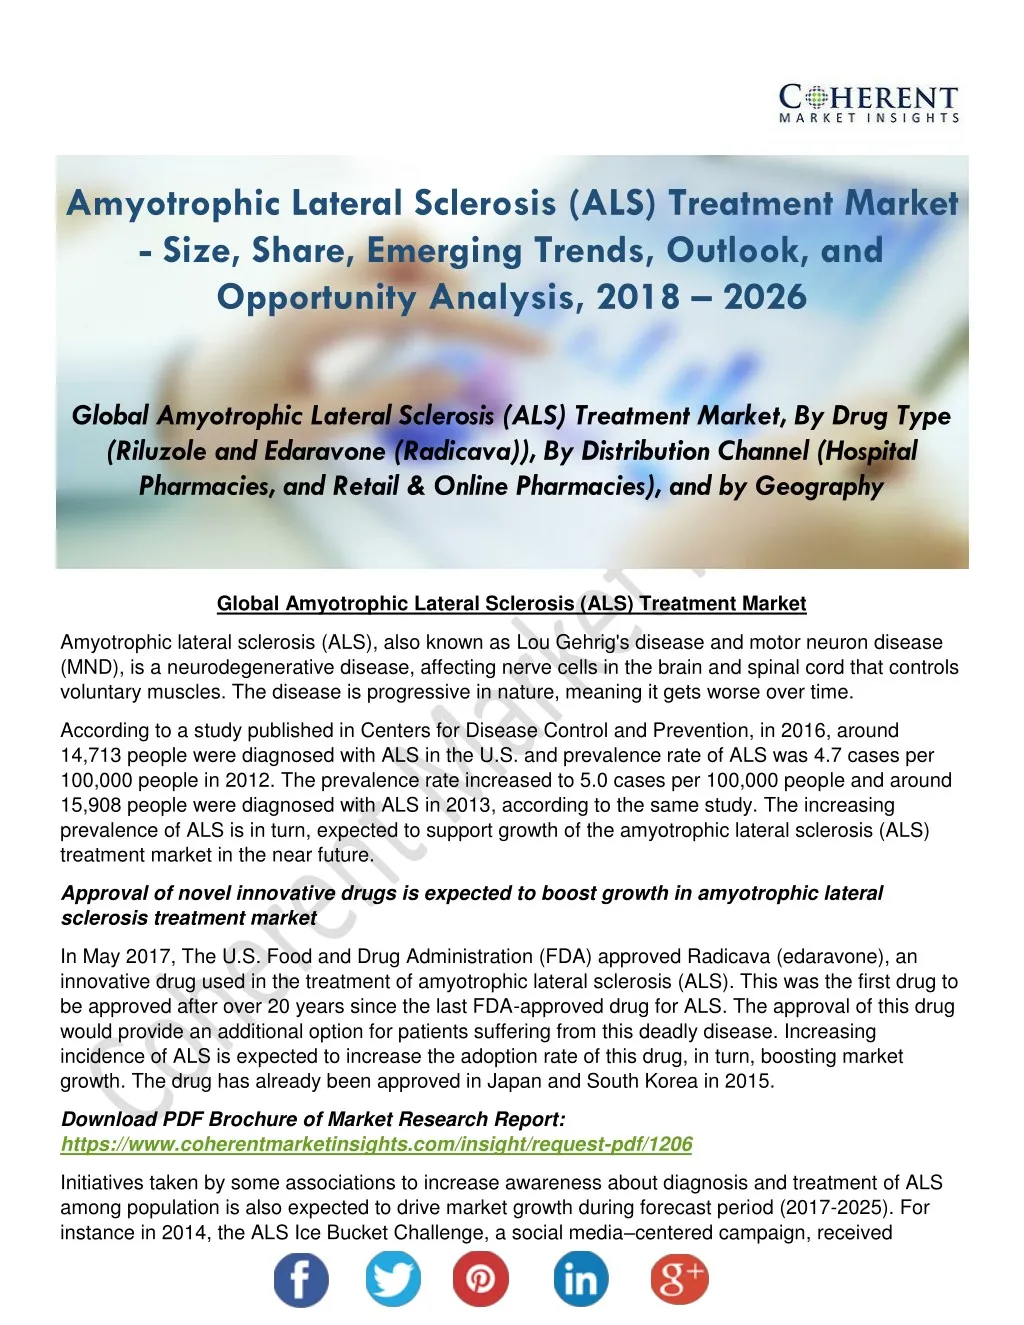 amyotrophic lateral sclerosis als treatment